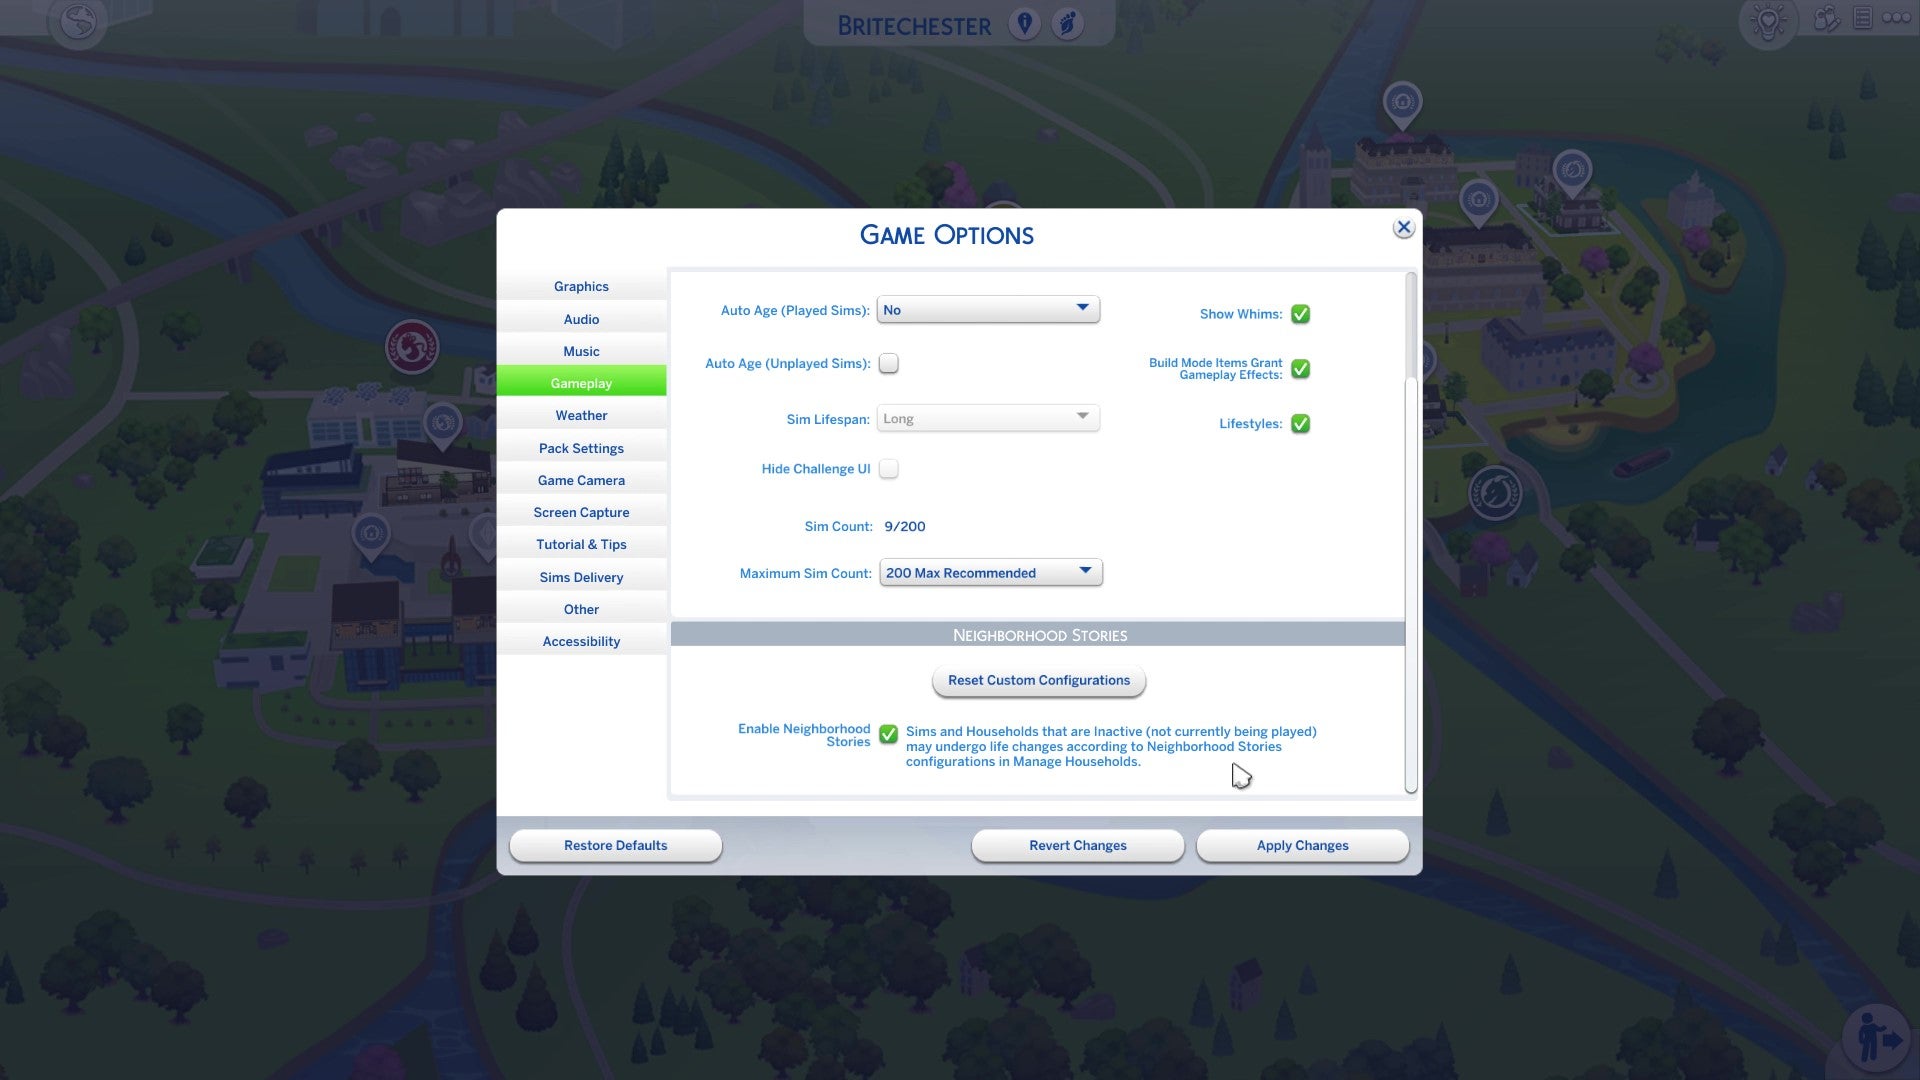 The main gameplay options menu in The Sims 4, showing the new Neighborhood Stories sub-tab.